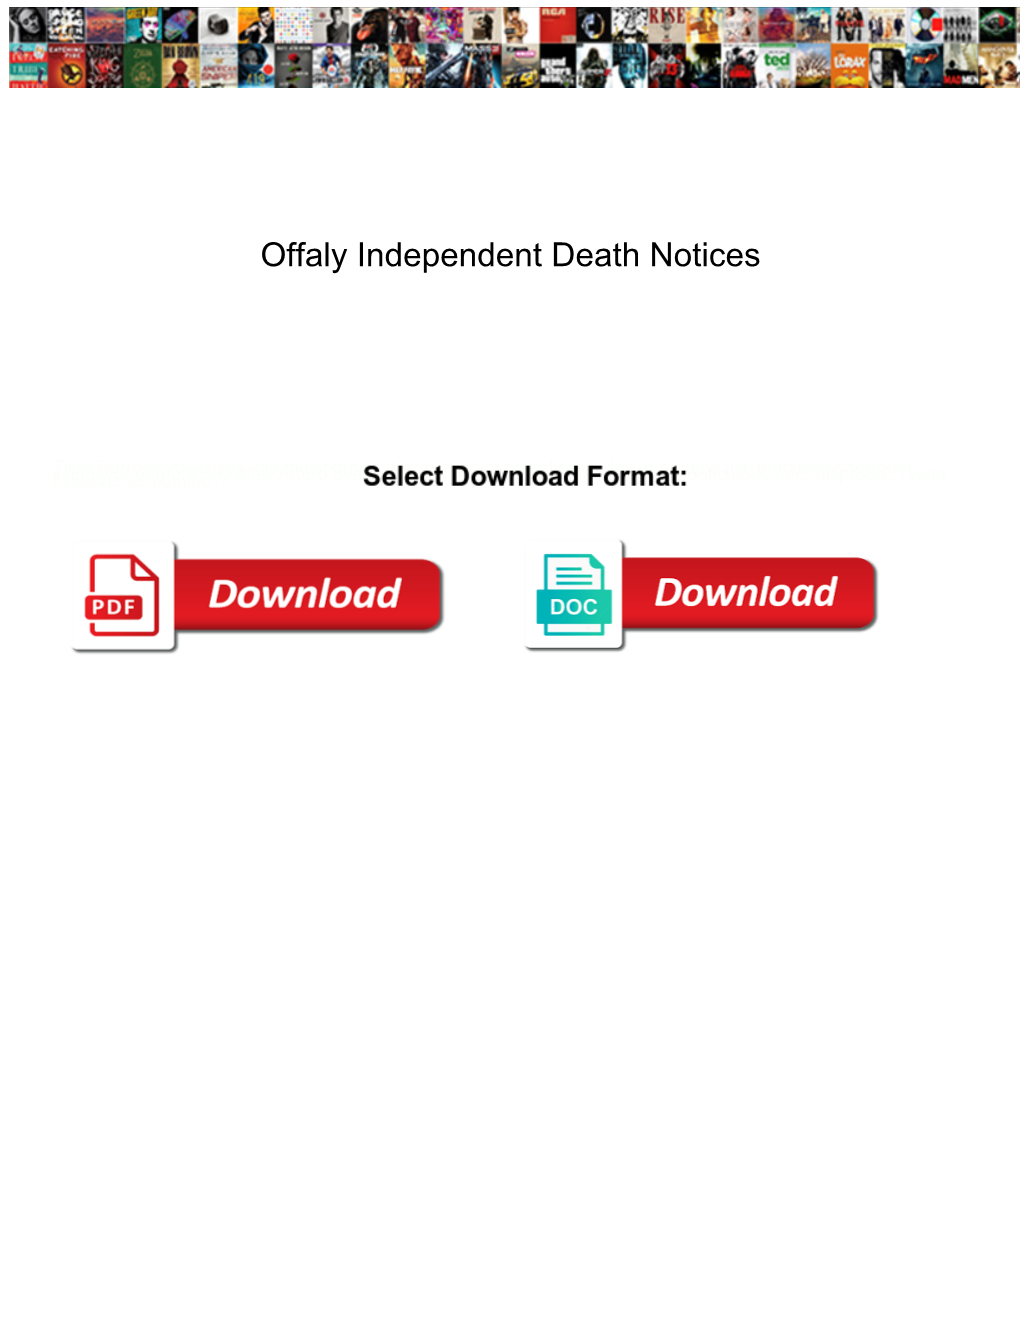 Offaly Independent Death Notices